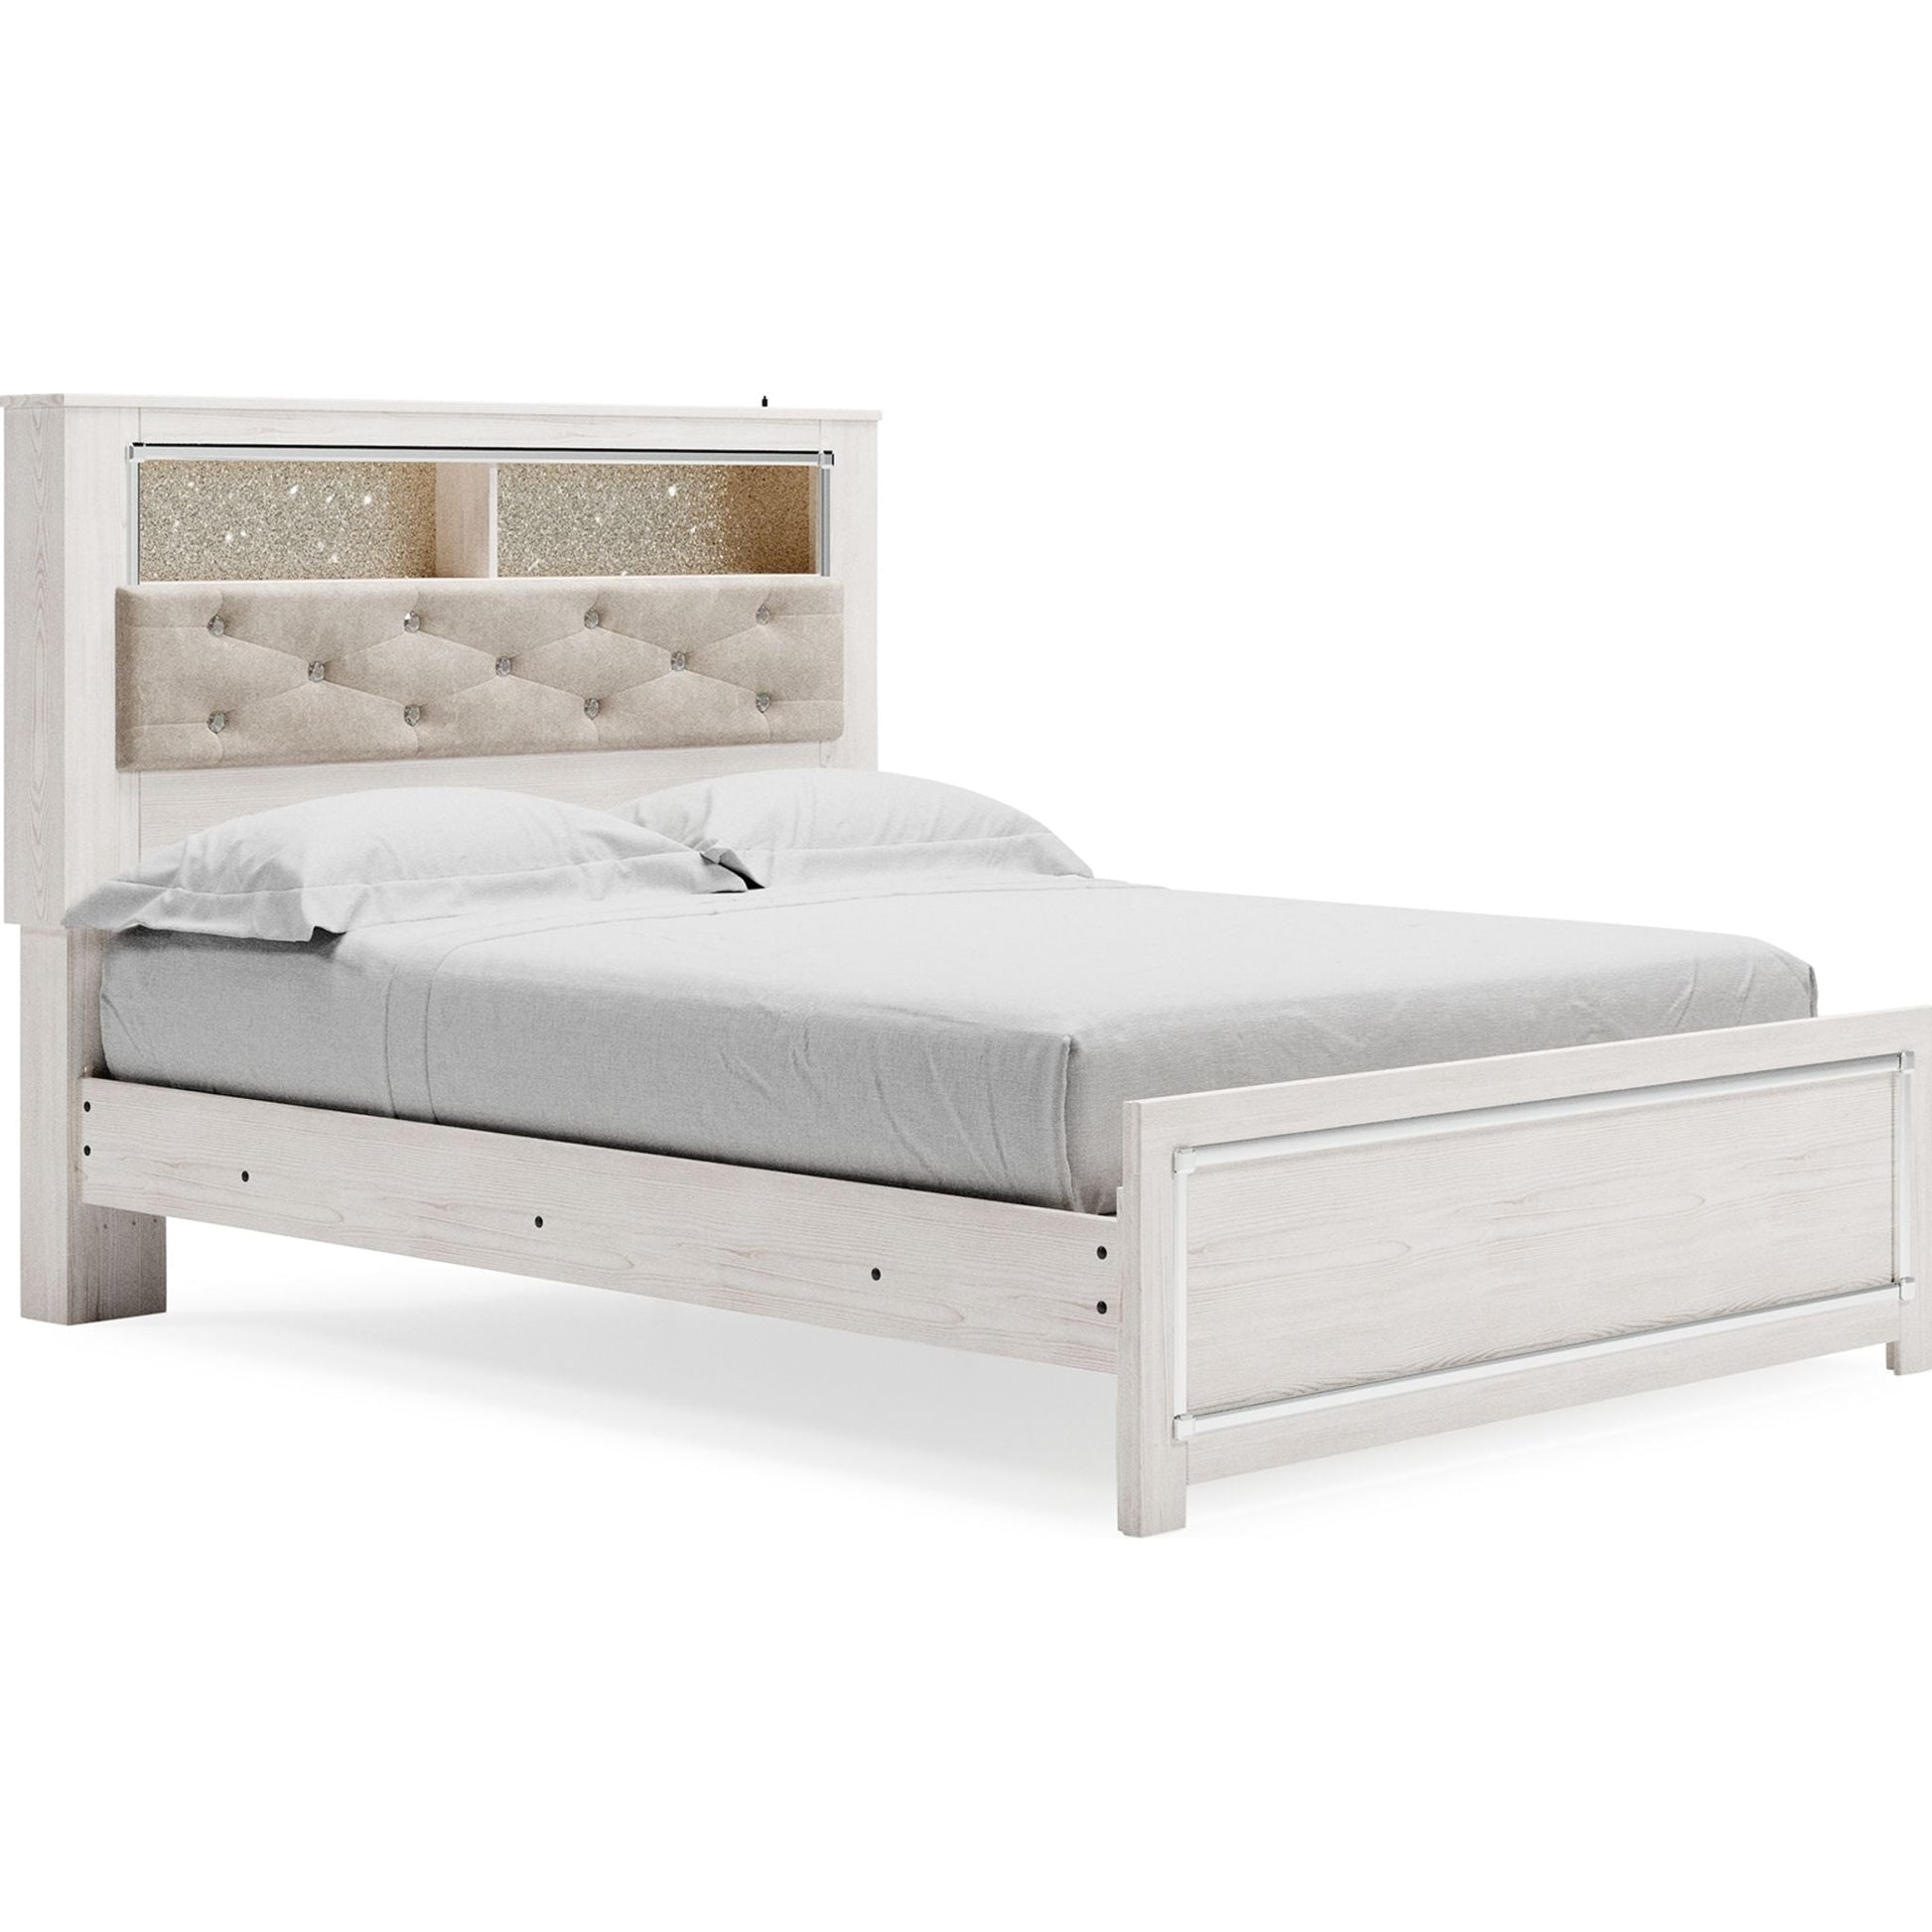 Oliah 3 Piece Queen Bed - White